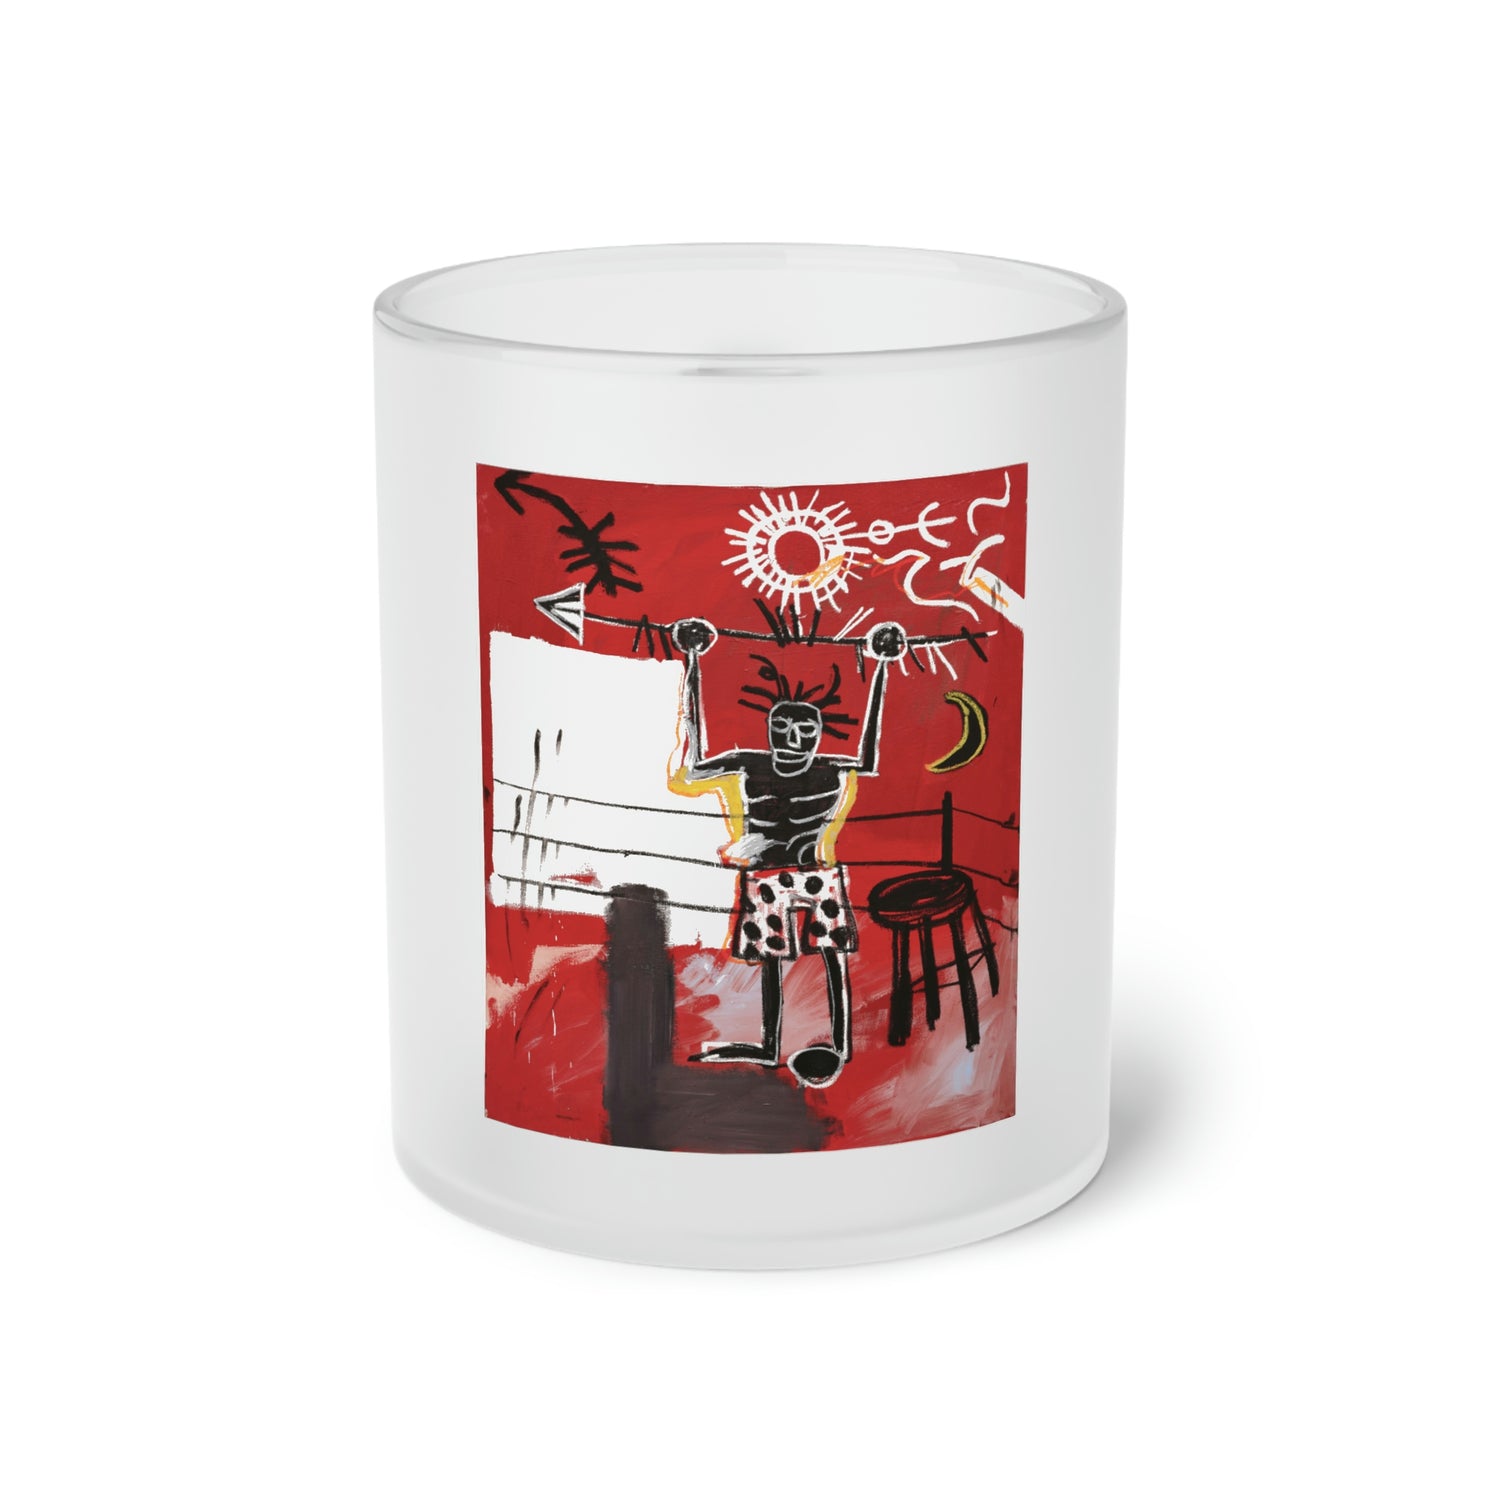 Jean-Michel Basquiat "The Ring" Frosted Glass Mug